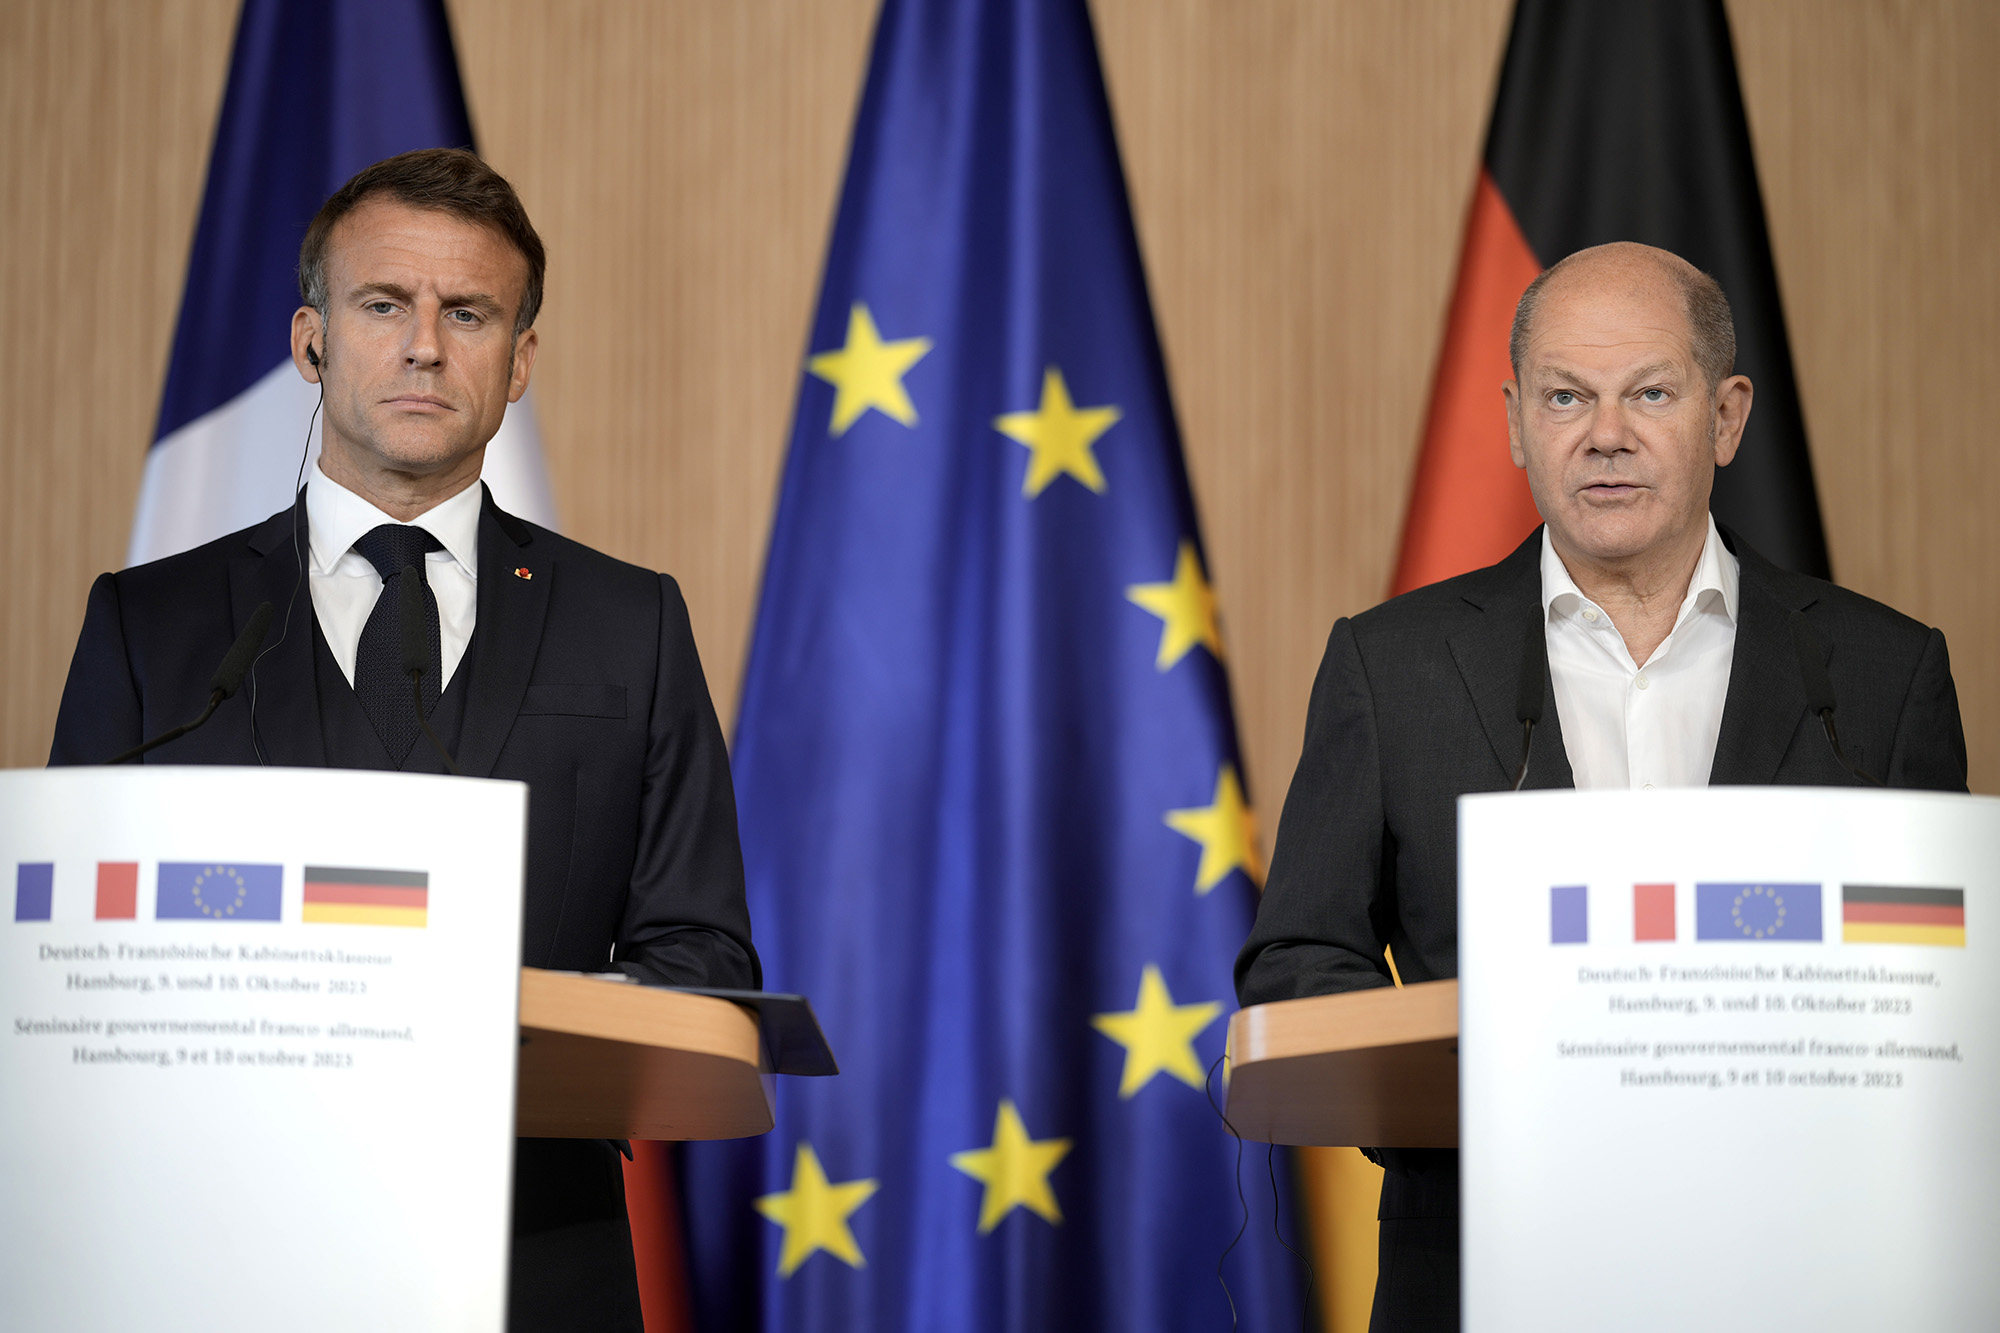 German Chancellor Olaf Scholz, right, and French President Emmanuel Macron speak at a news conference after a joint cabinet meeting of the German and French governments in Hamburg on Tuesday.